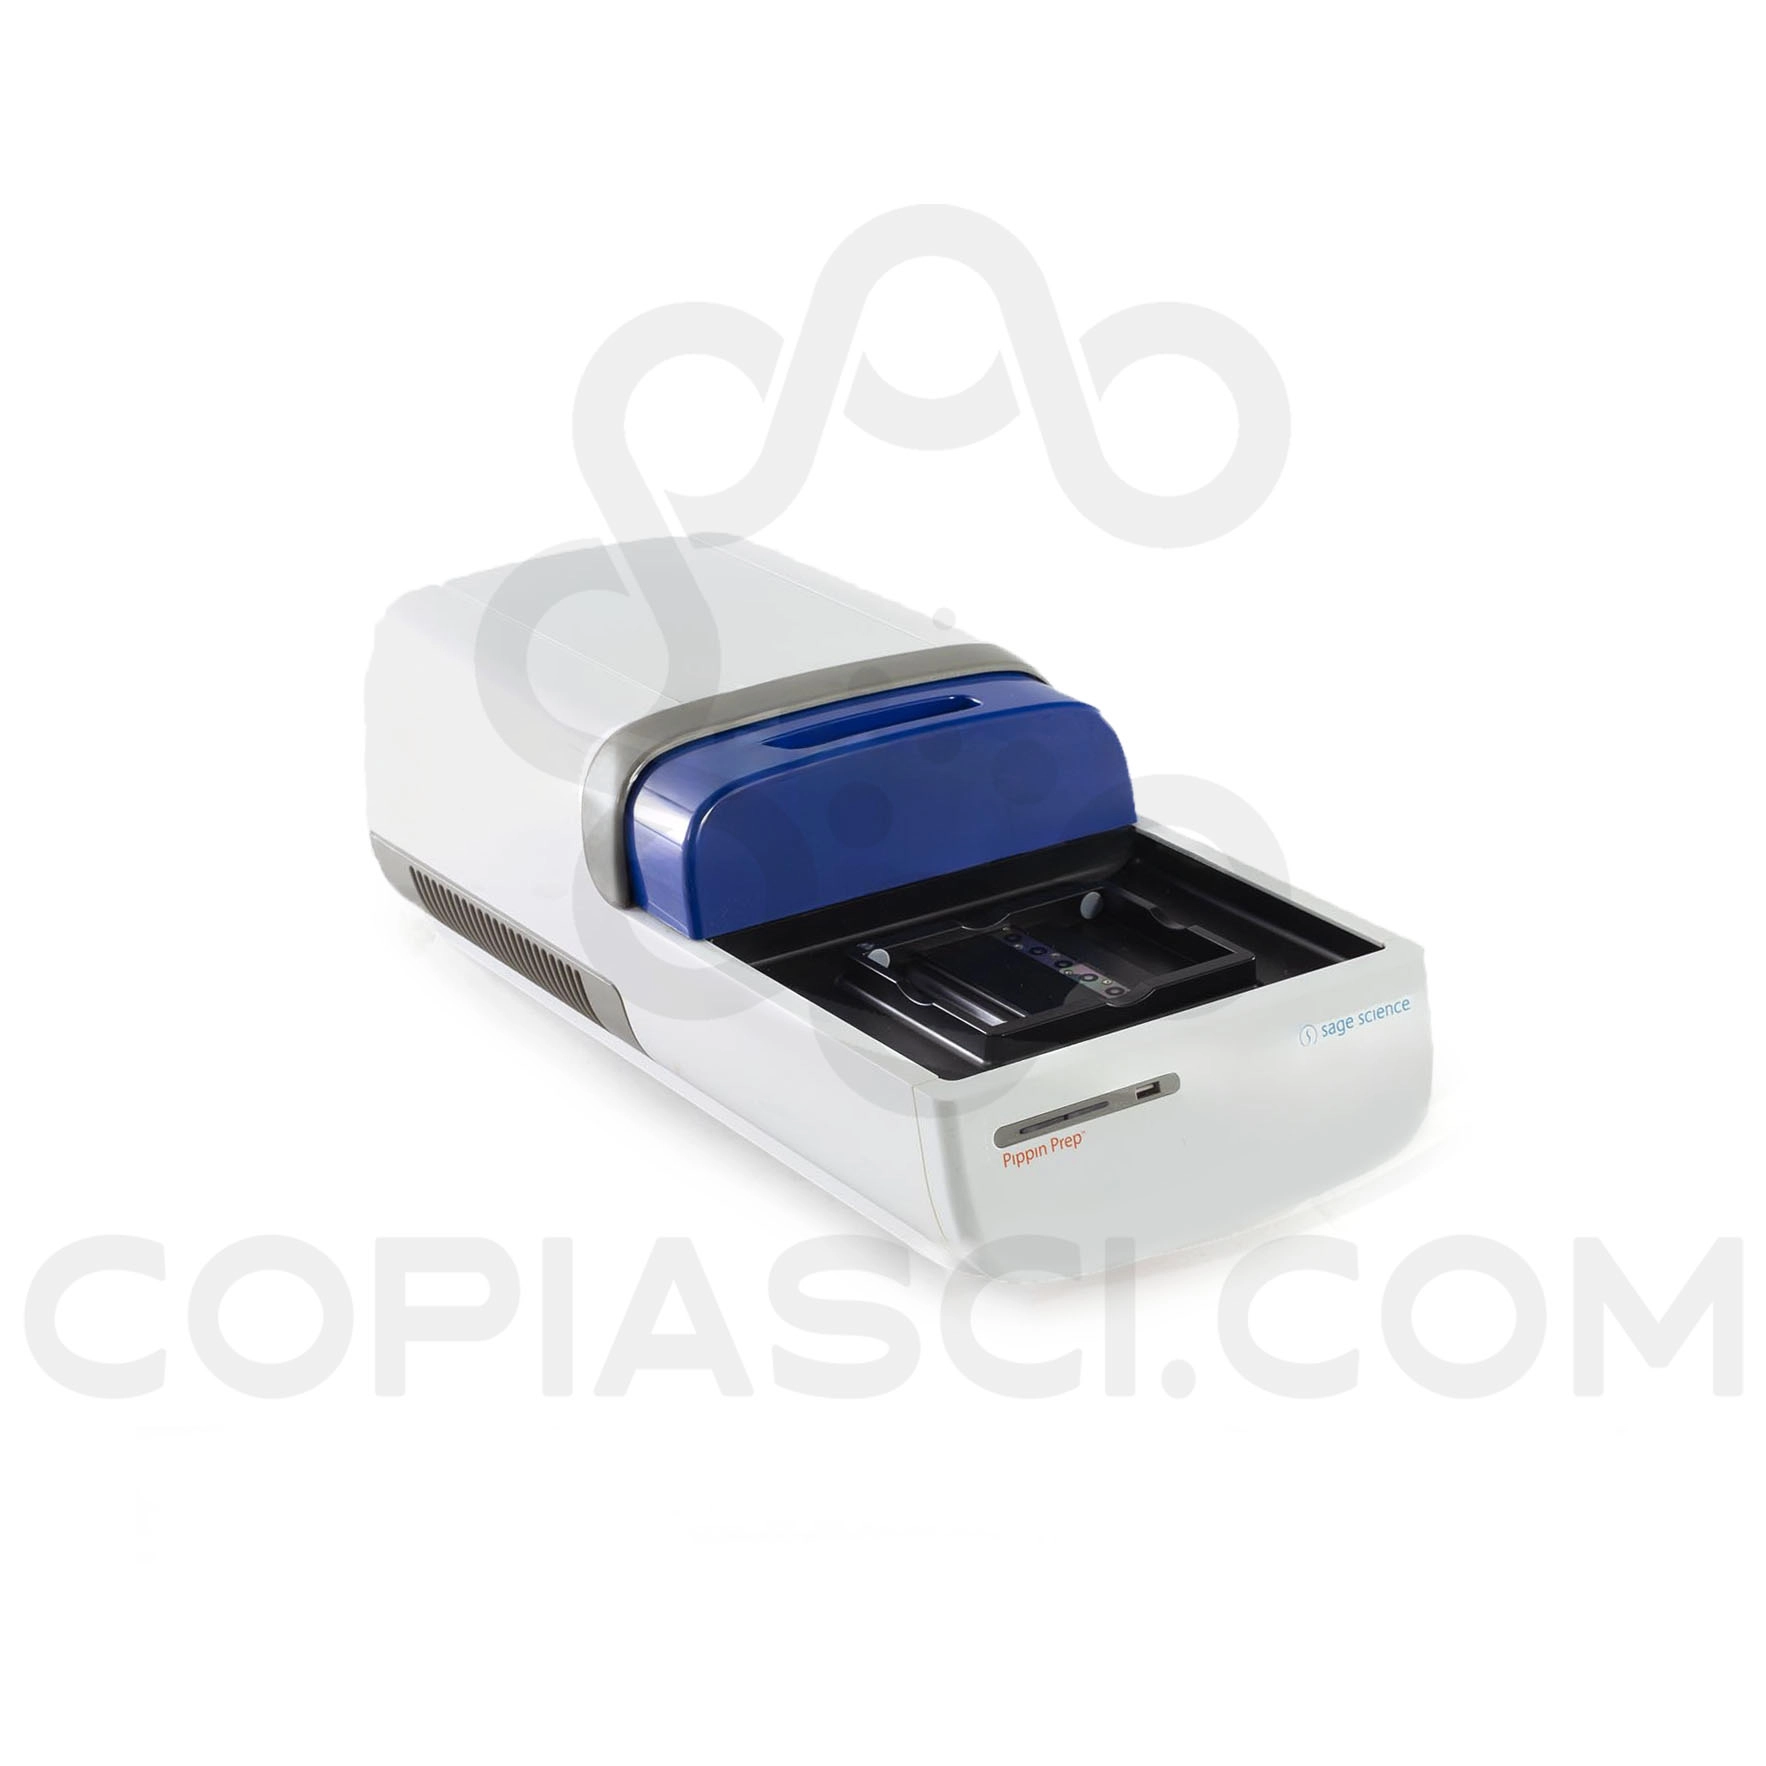 Sage Science, Inc Pippin Prep DNA:Sequencer